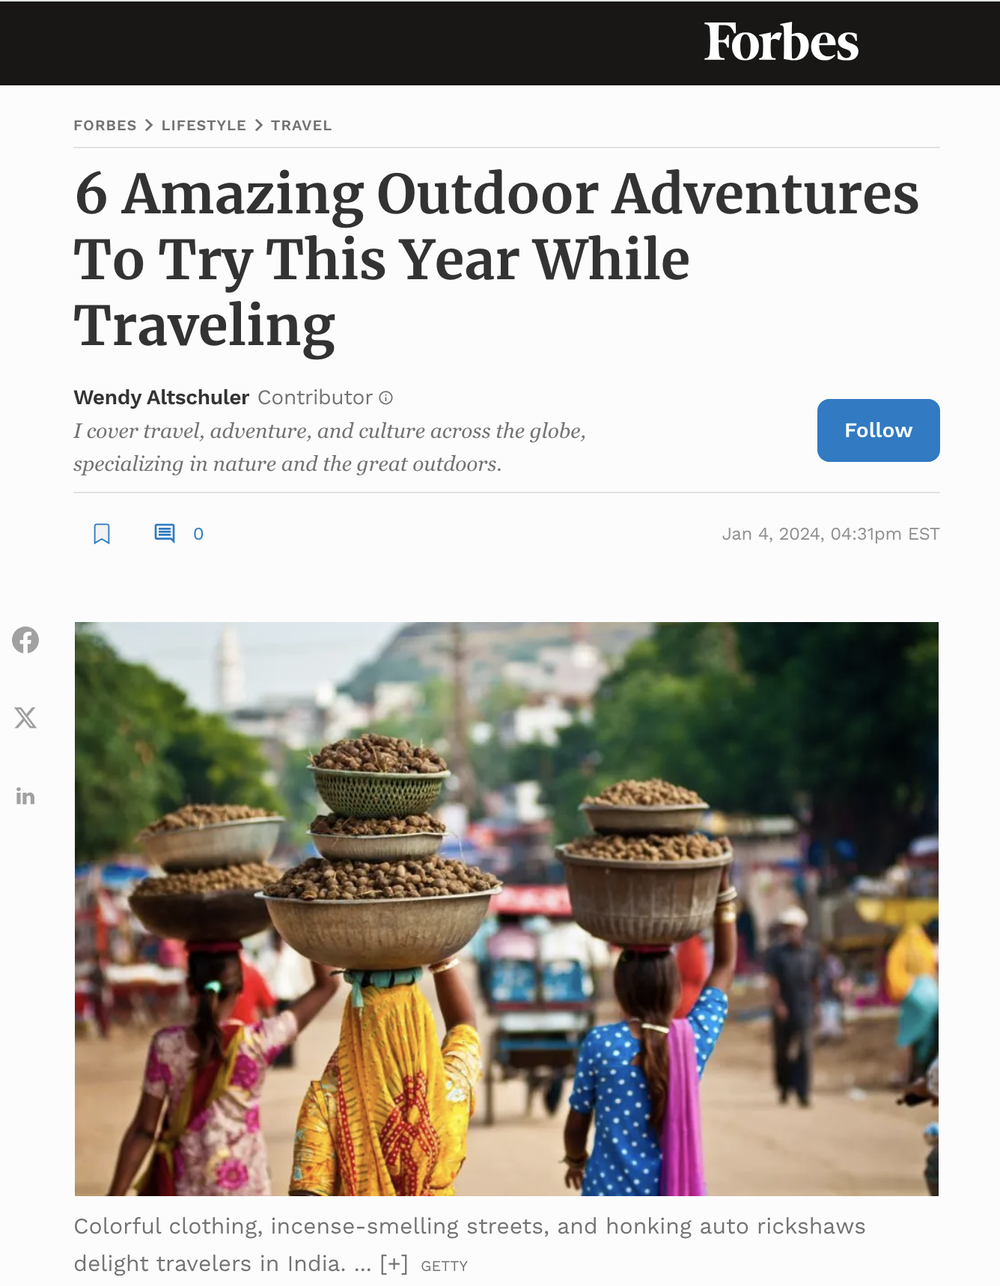 6 Amazing Outdoor Adventures To Try This Year While Traveling